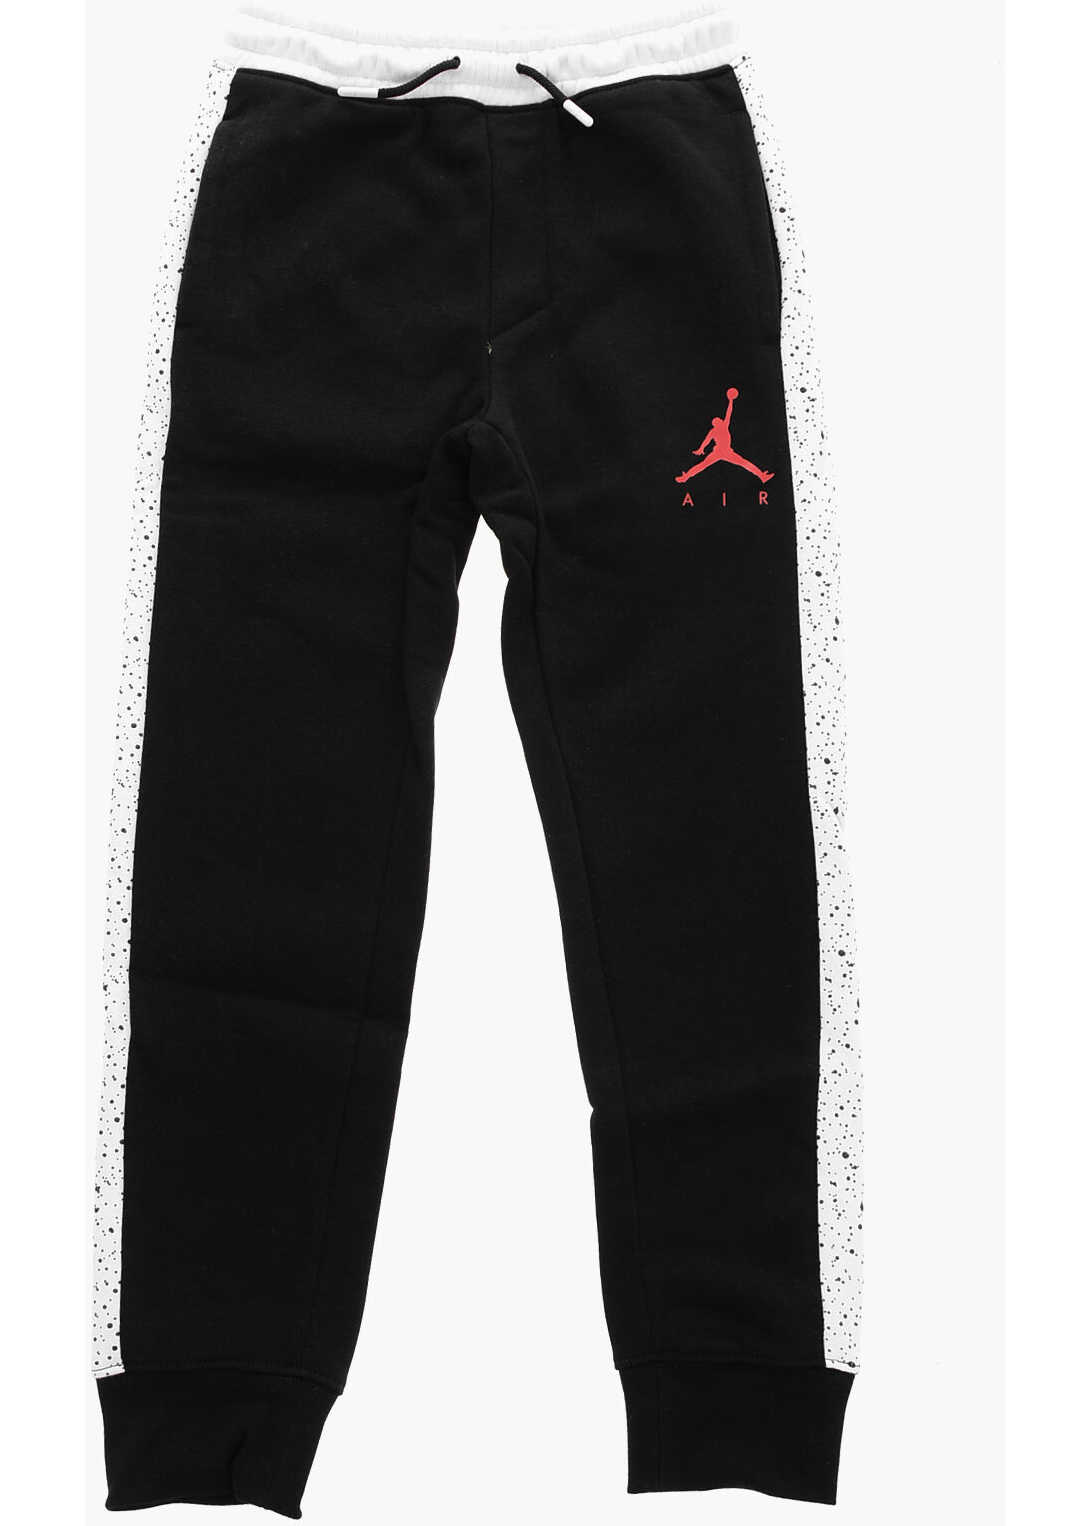 Nike Air Jordan Fleeced-Cotton Joggers With Side Contrast Bands Black & White